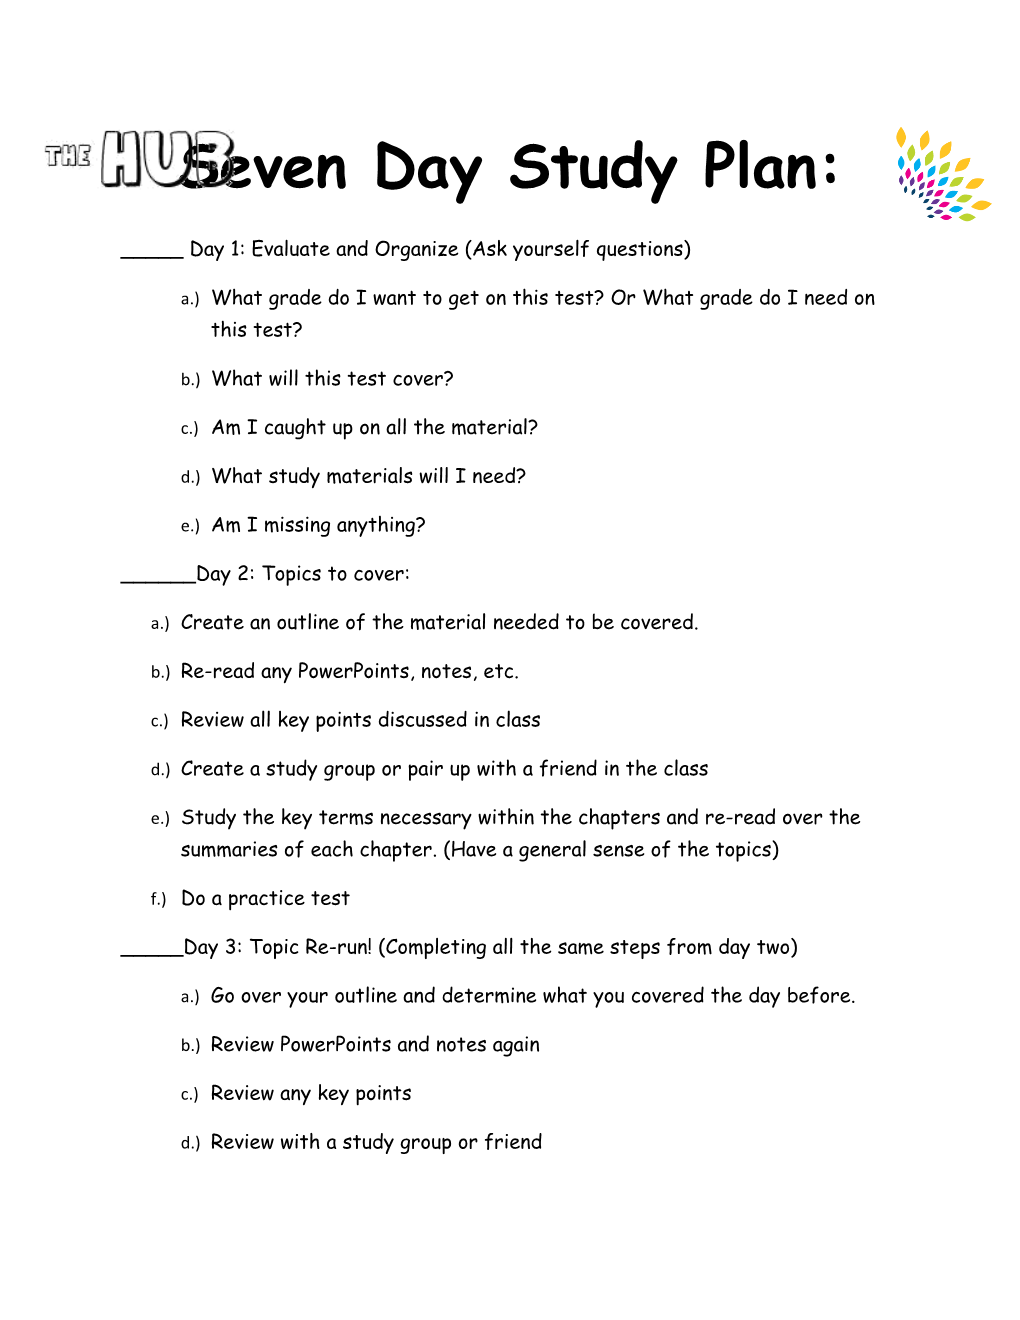 _____ Day 1: Evaluate and Organize (Ask Yourself Questions)